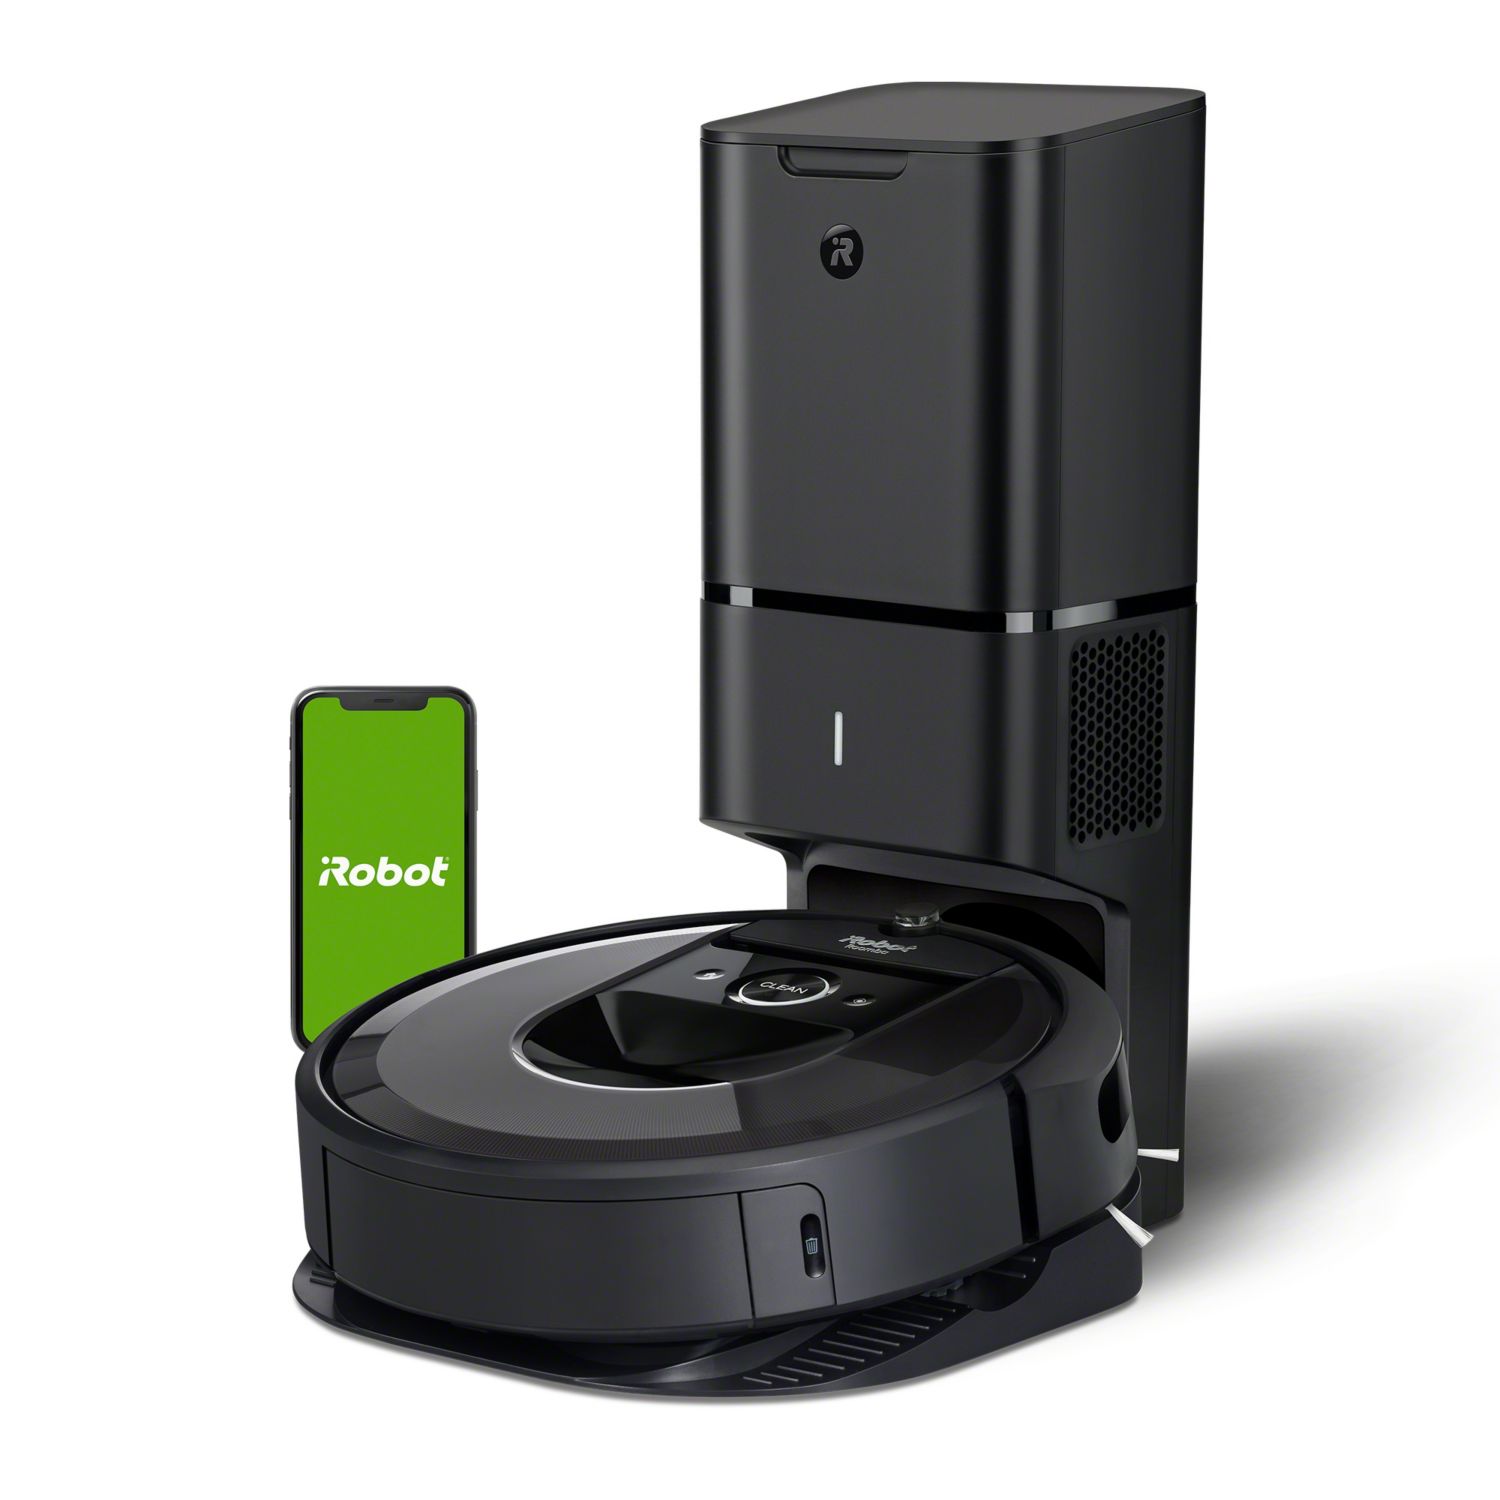 iRobot Roomba i7 - BedBathBeyond has same price as Prime Day’s deal on the i6 $499.99 (plus 20% off for joining B+ And $100 BBB credit for spending $400)